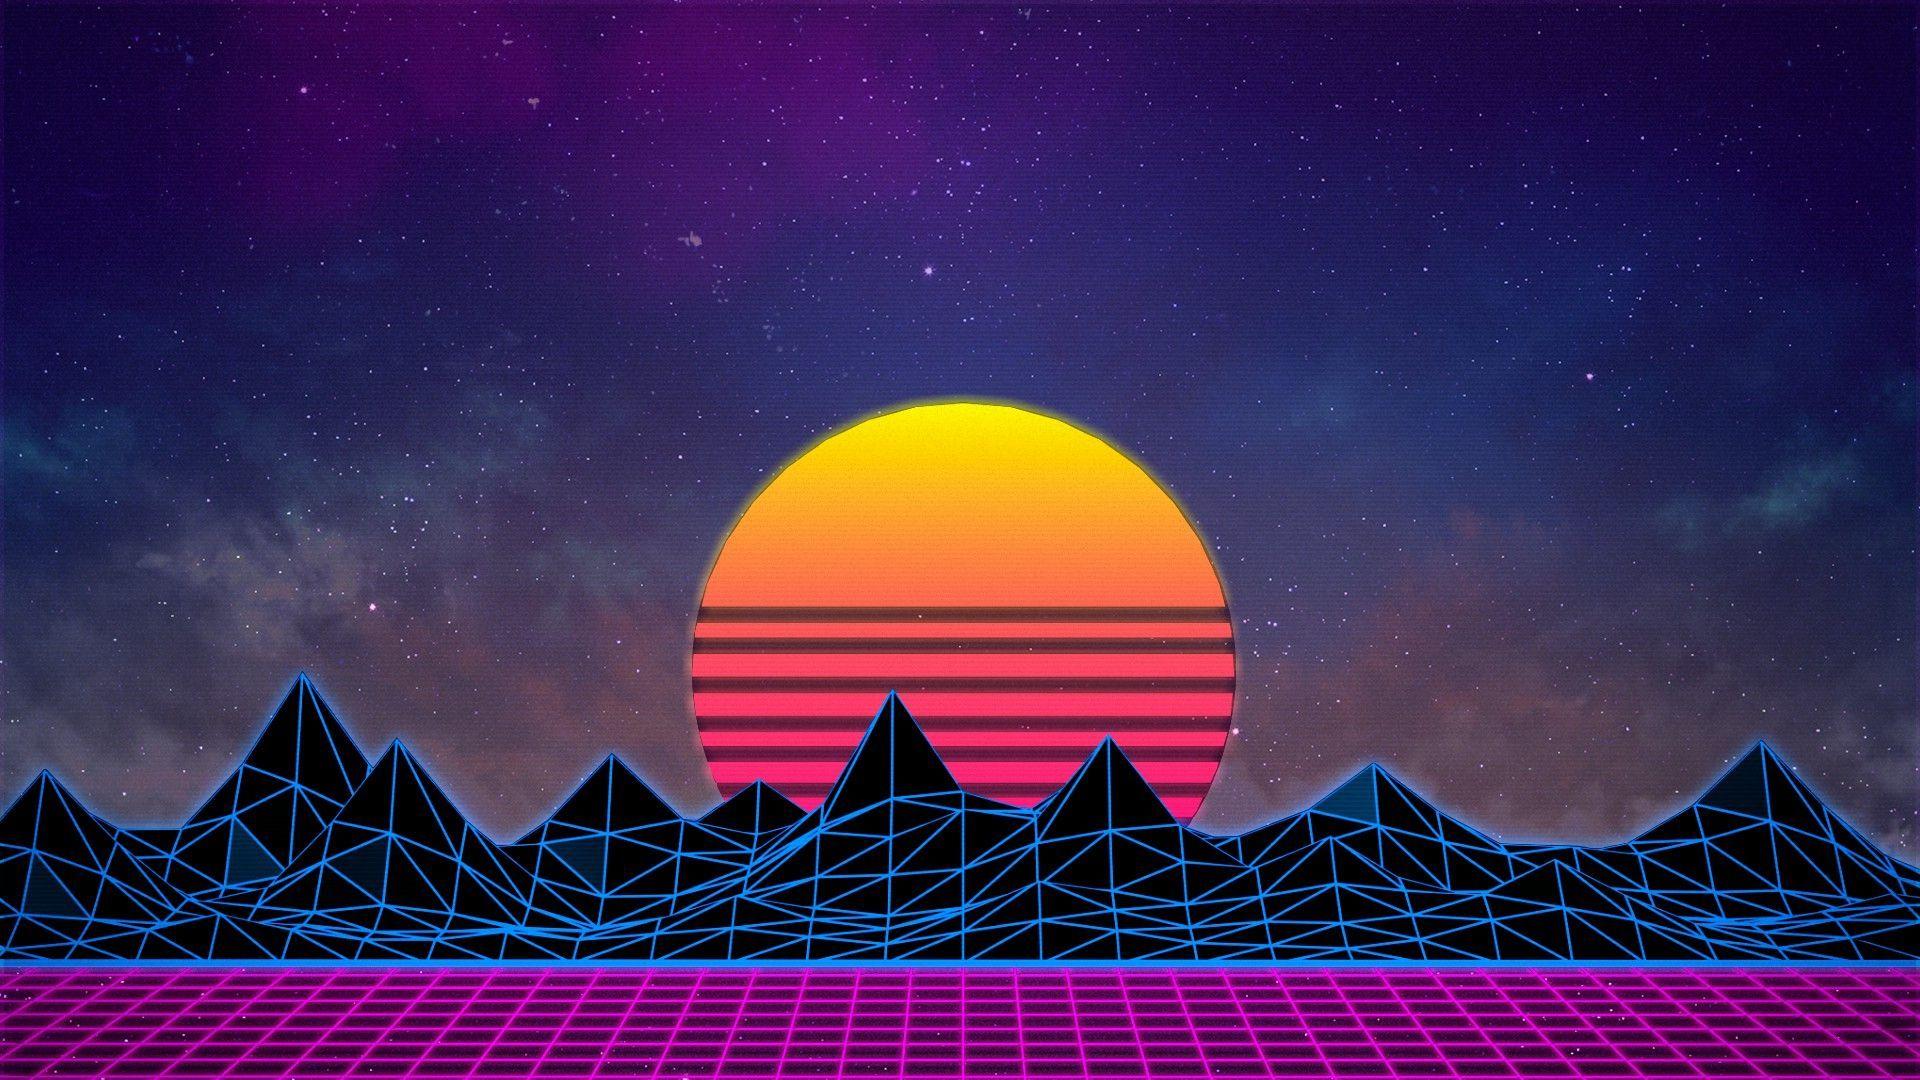 HD wallpaper 1980s vibes retro style outdrive video games  Wallpaper Flare